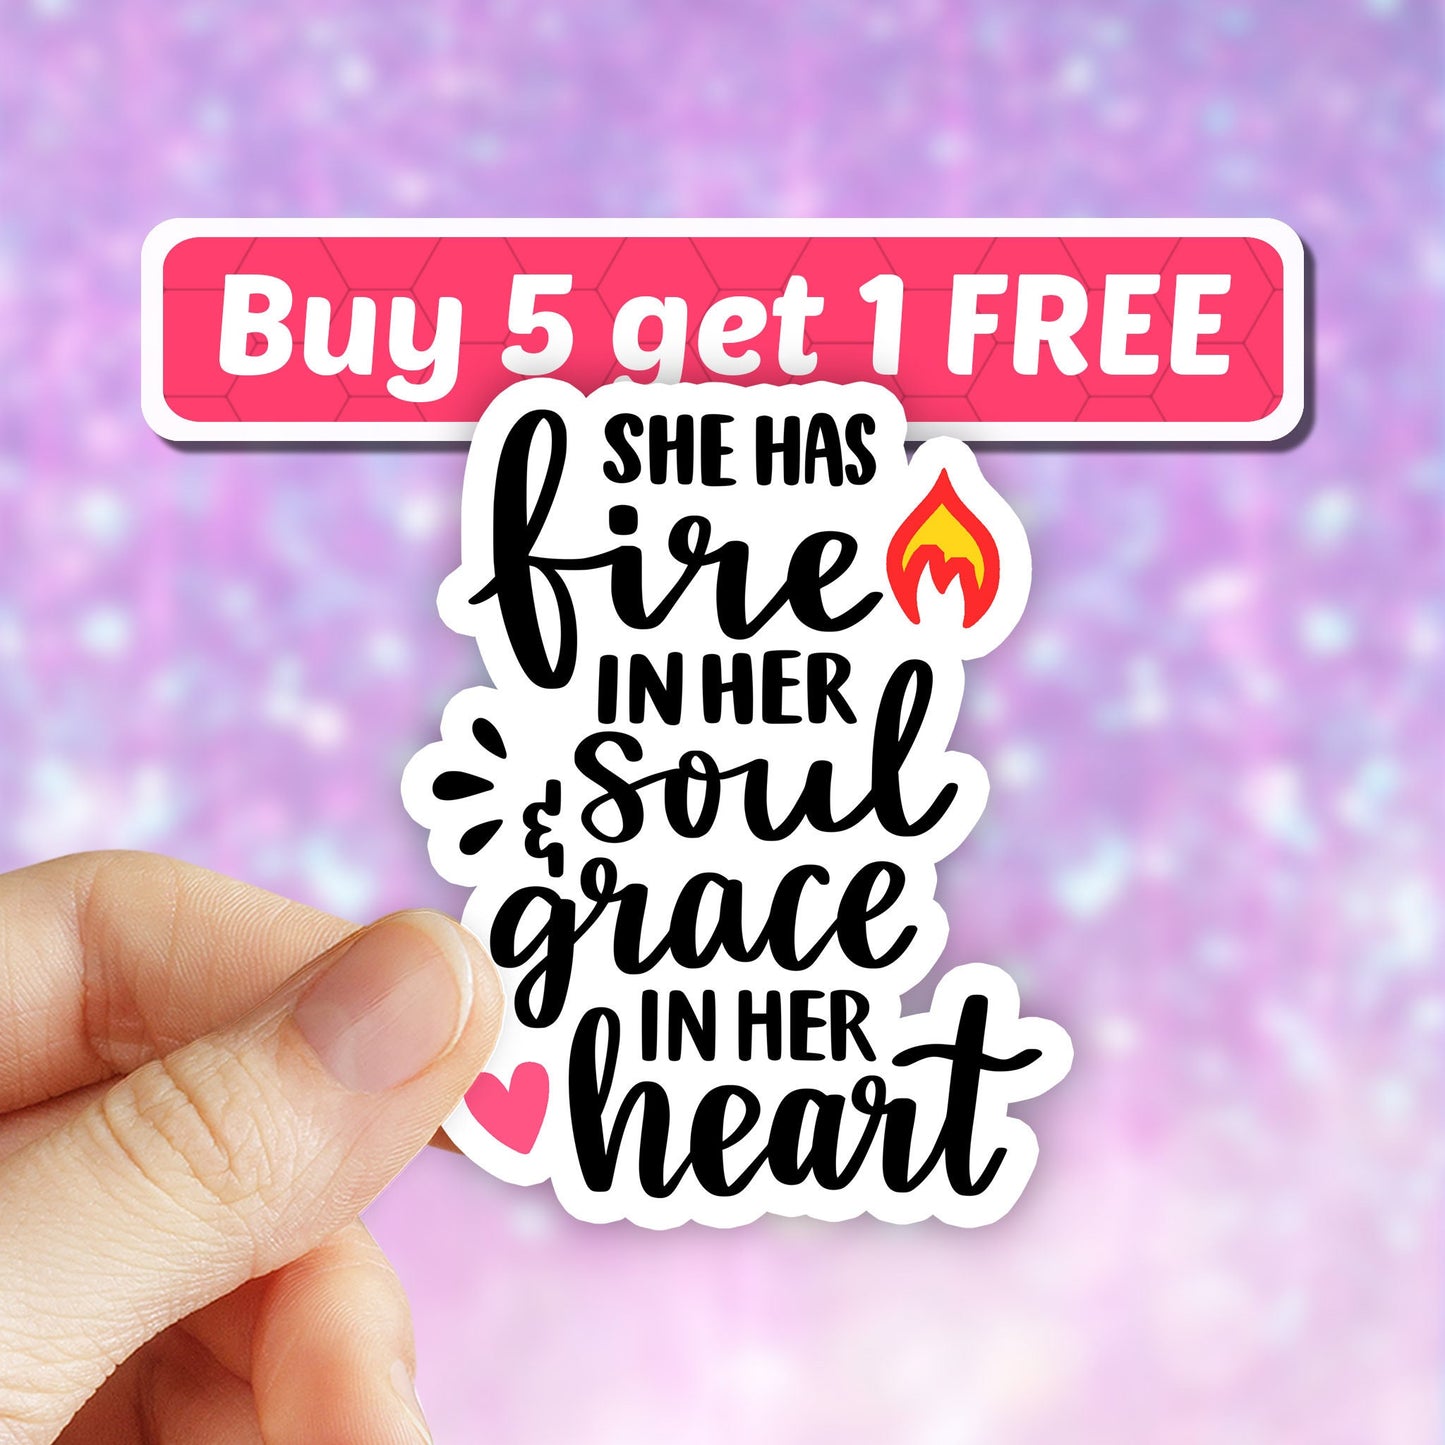 She has fire in her soul grace in her heart sticker, inspirational quotes, motivational sticker, Girl power, encouraging sticker, laptop